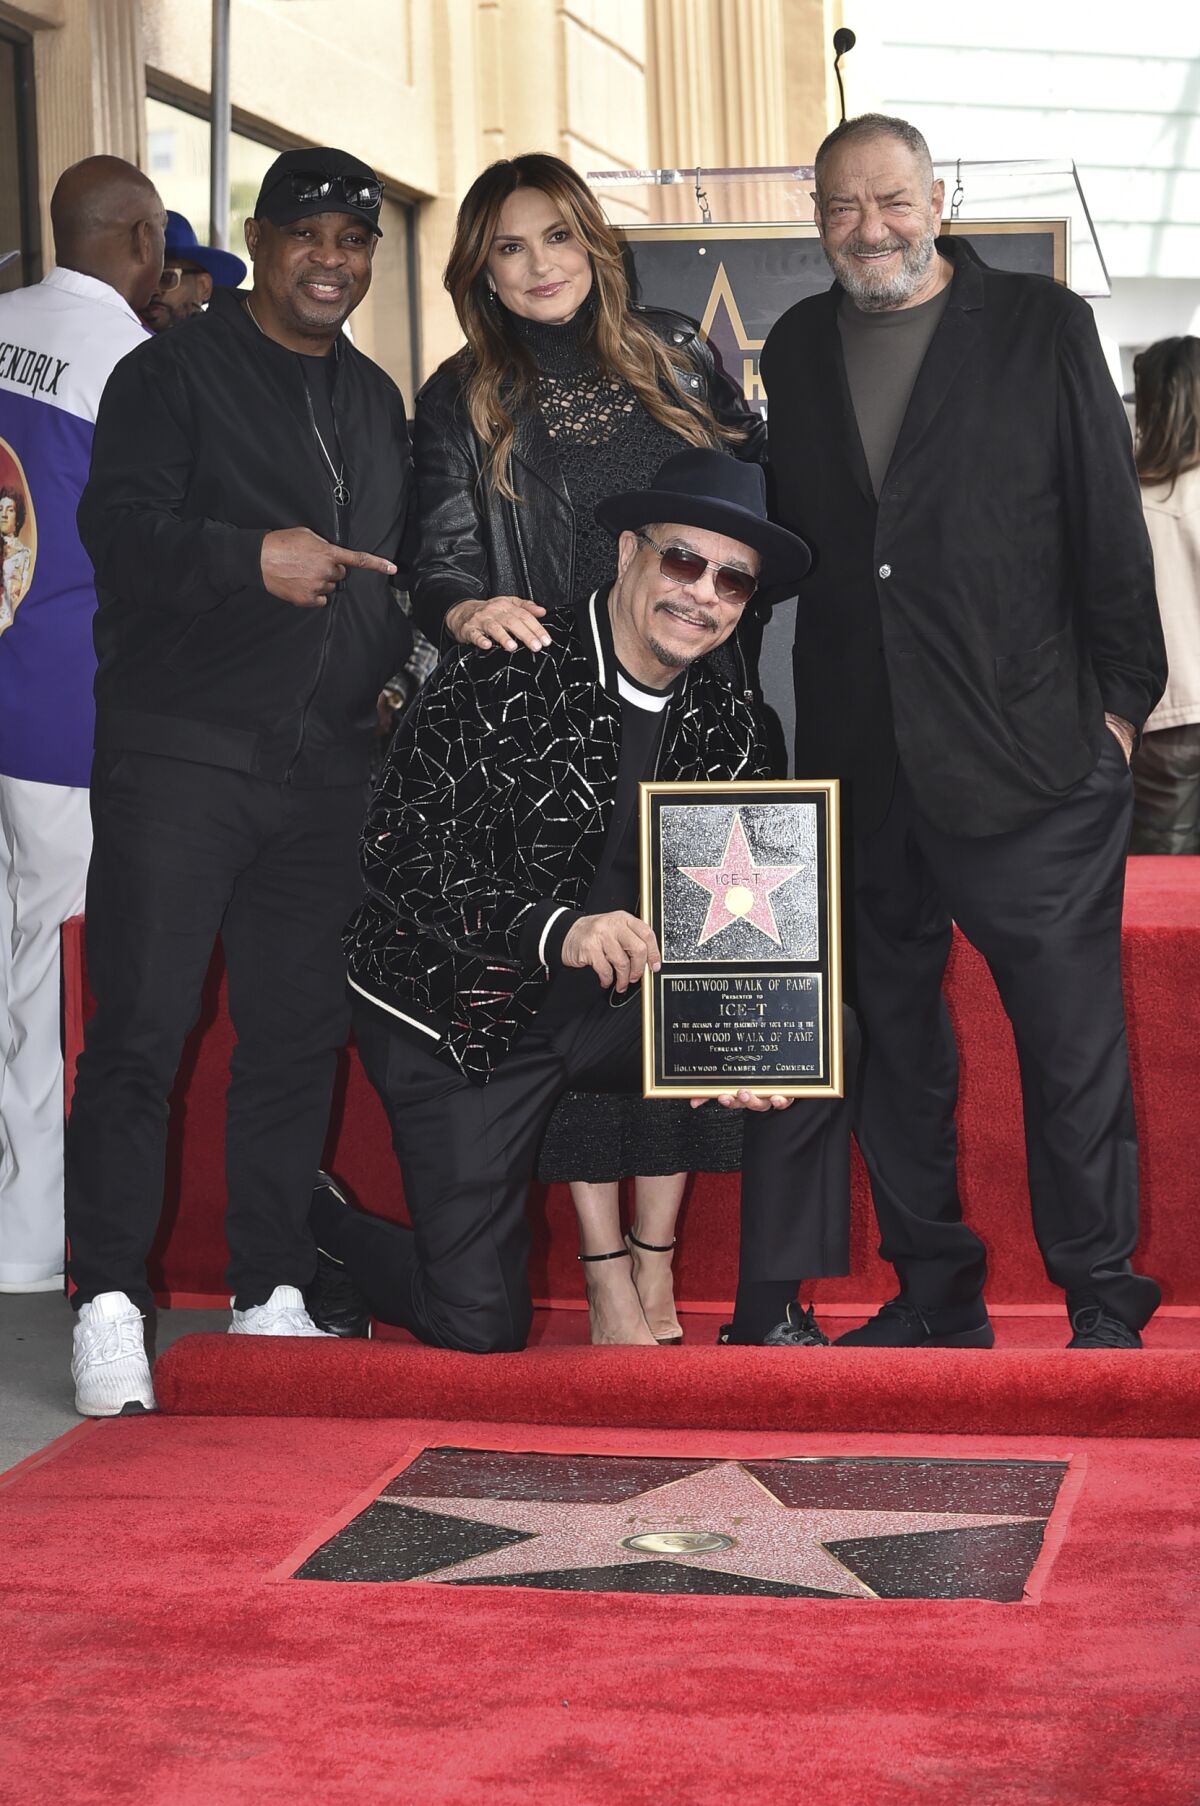 Two men with a woman between them stand behind a man in sunglasses and a hat who is getting a star on Hollywood Boulevard